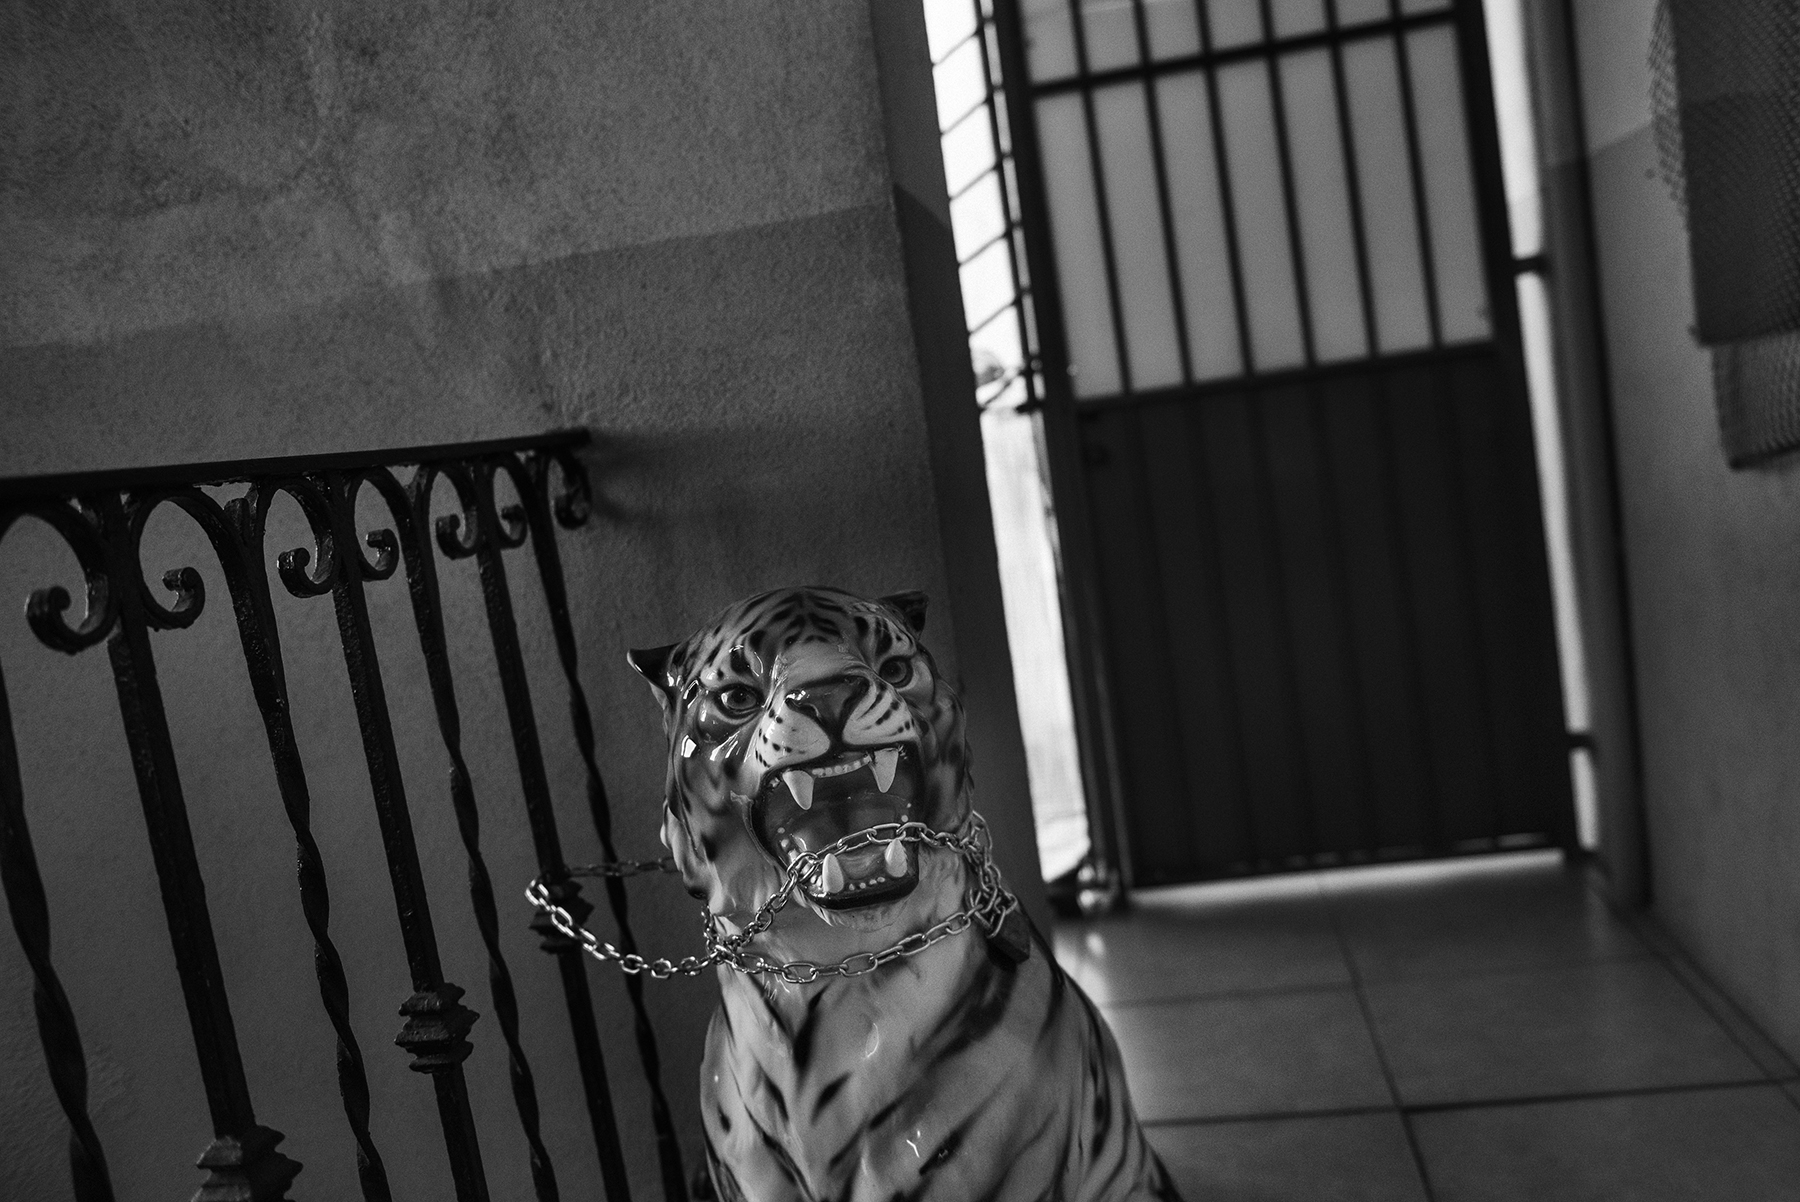  A tiger statue inside the former council estate building of Jacob Bamba (30), with shared toilets on the balconies, in the working class district of Barriera di Milano in Turin, Italy; November 2018. 